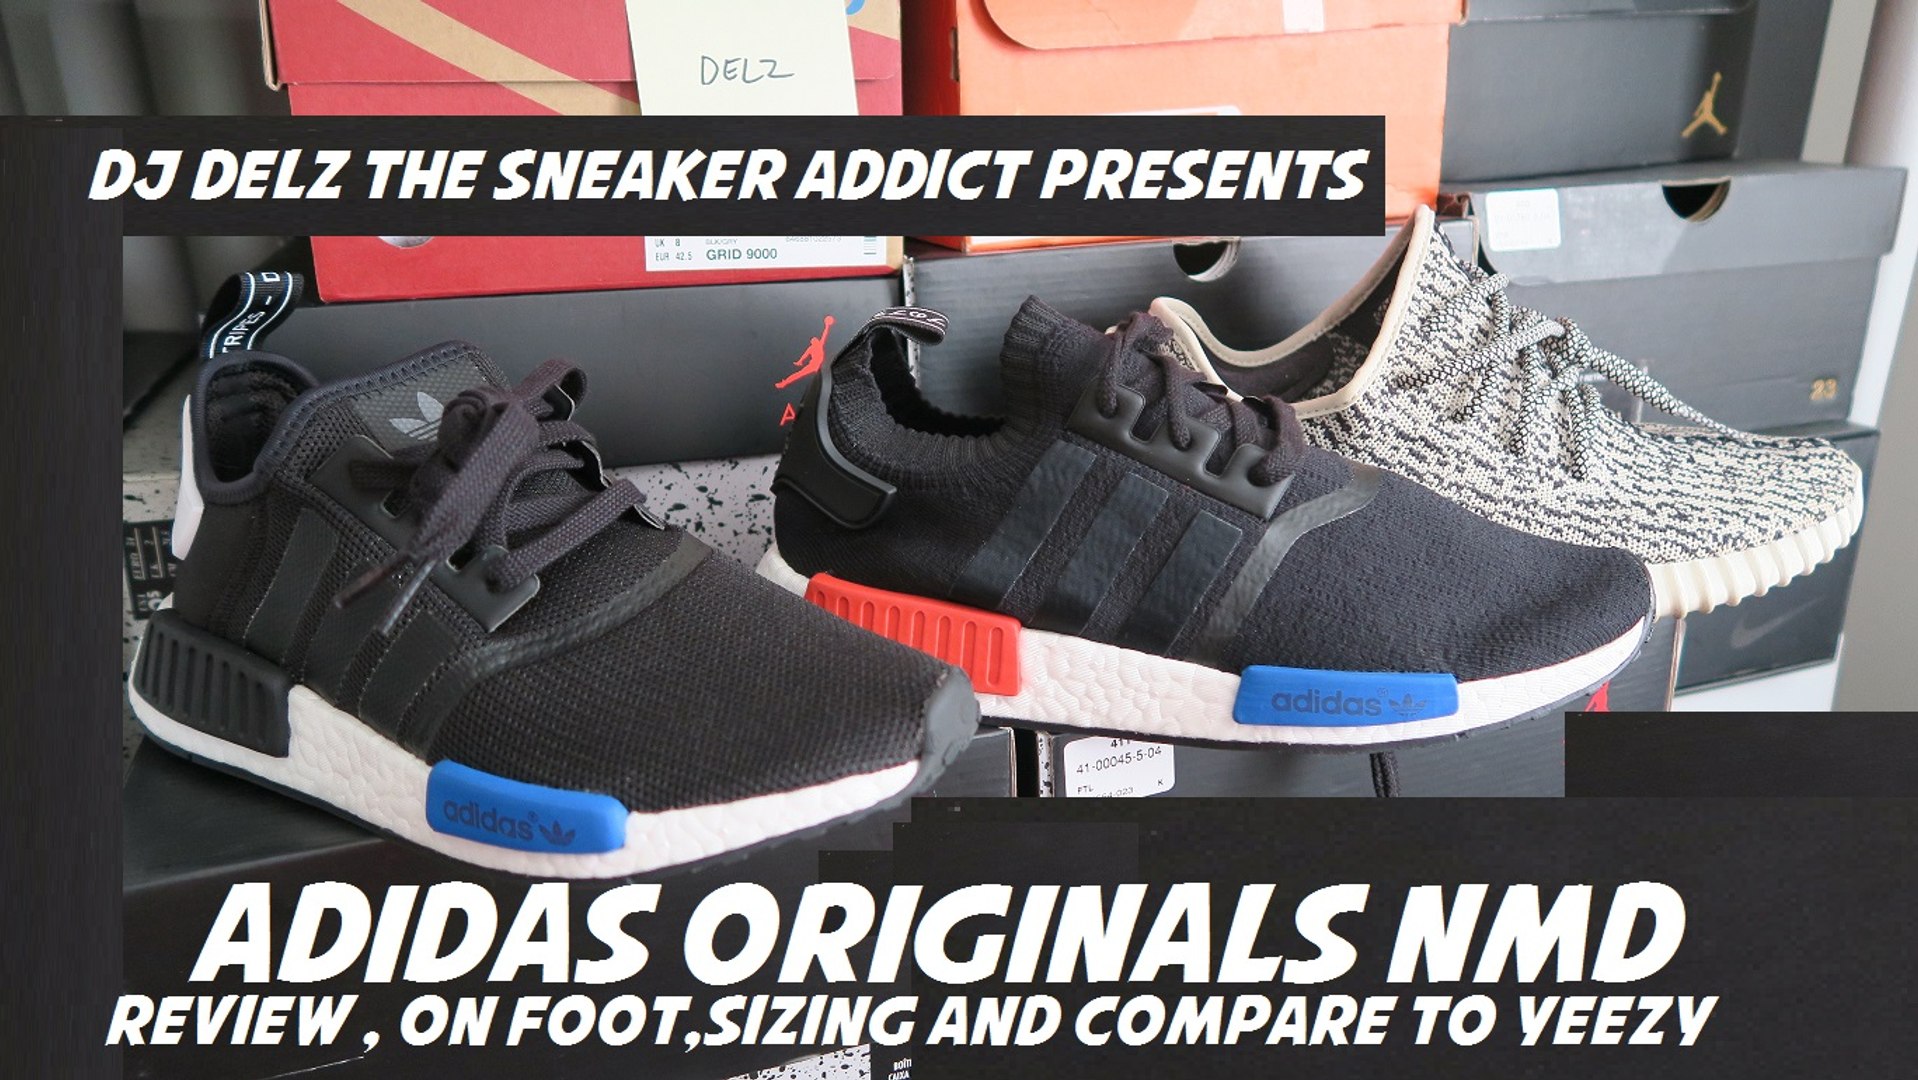 molécula Plausible aterrizaje adidas Originals NMD Boost Runner Mesh Version VS Primeknit VS Yeezy 350  Shoes Comparison Review + On Feet & Sizing - video Dailymotion